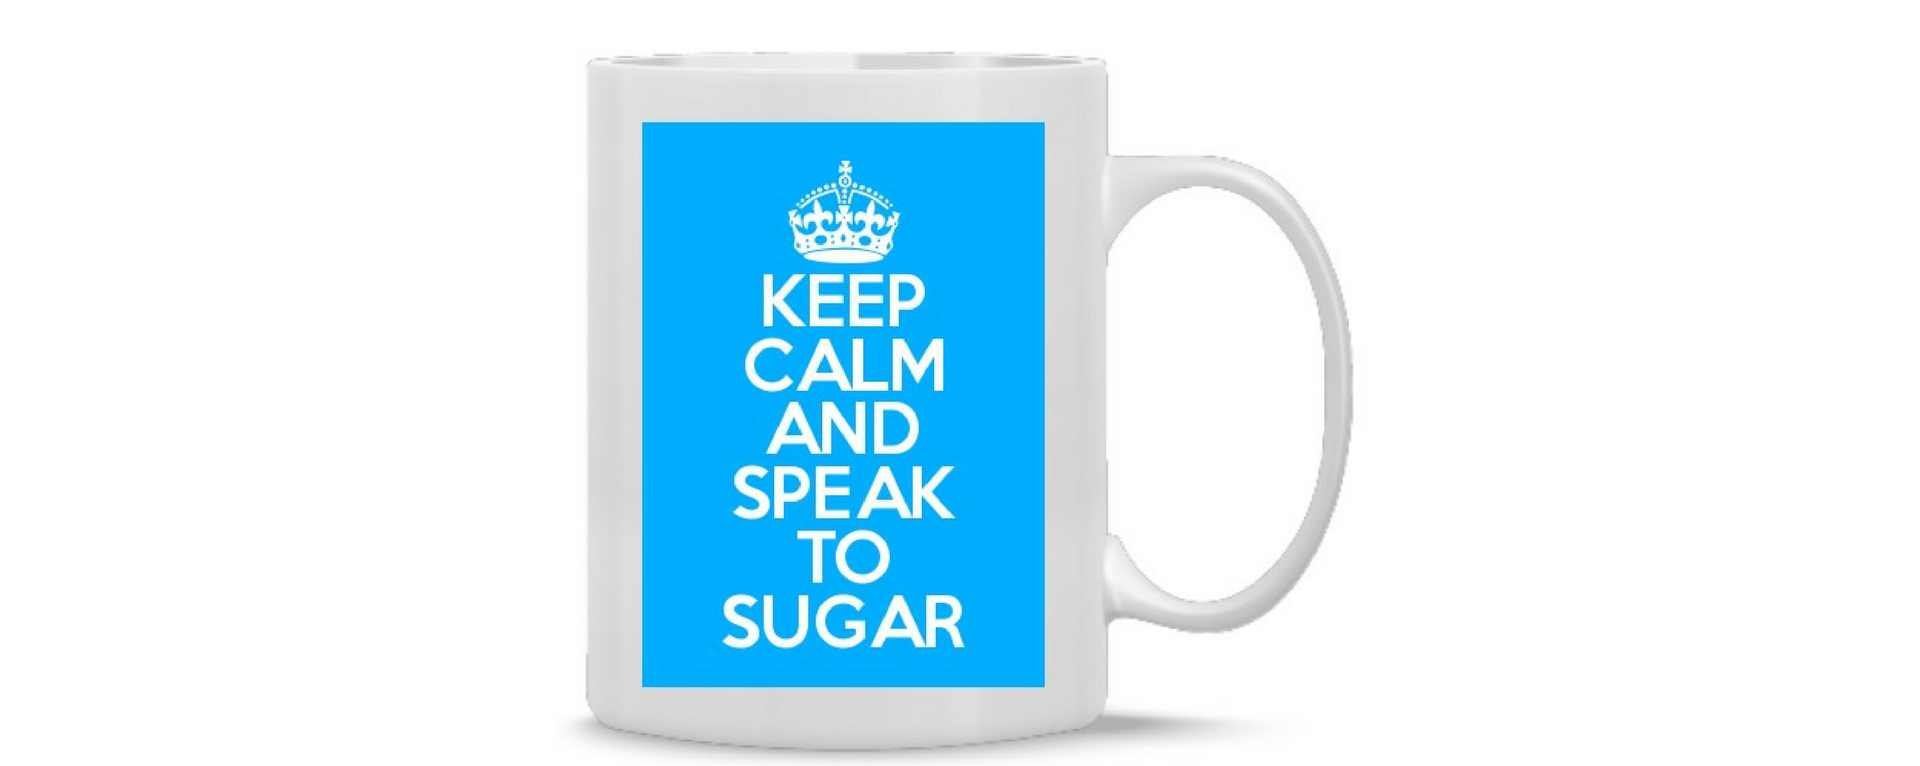 Crisis containment policy insurance claim? Keep calm and speak to Sugar PR.